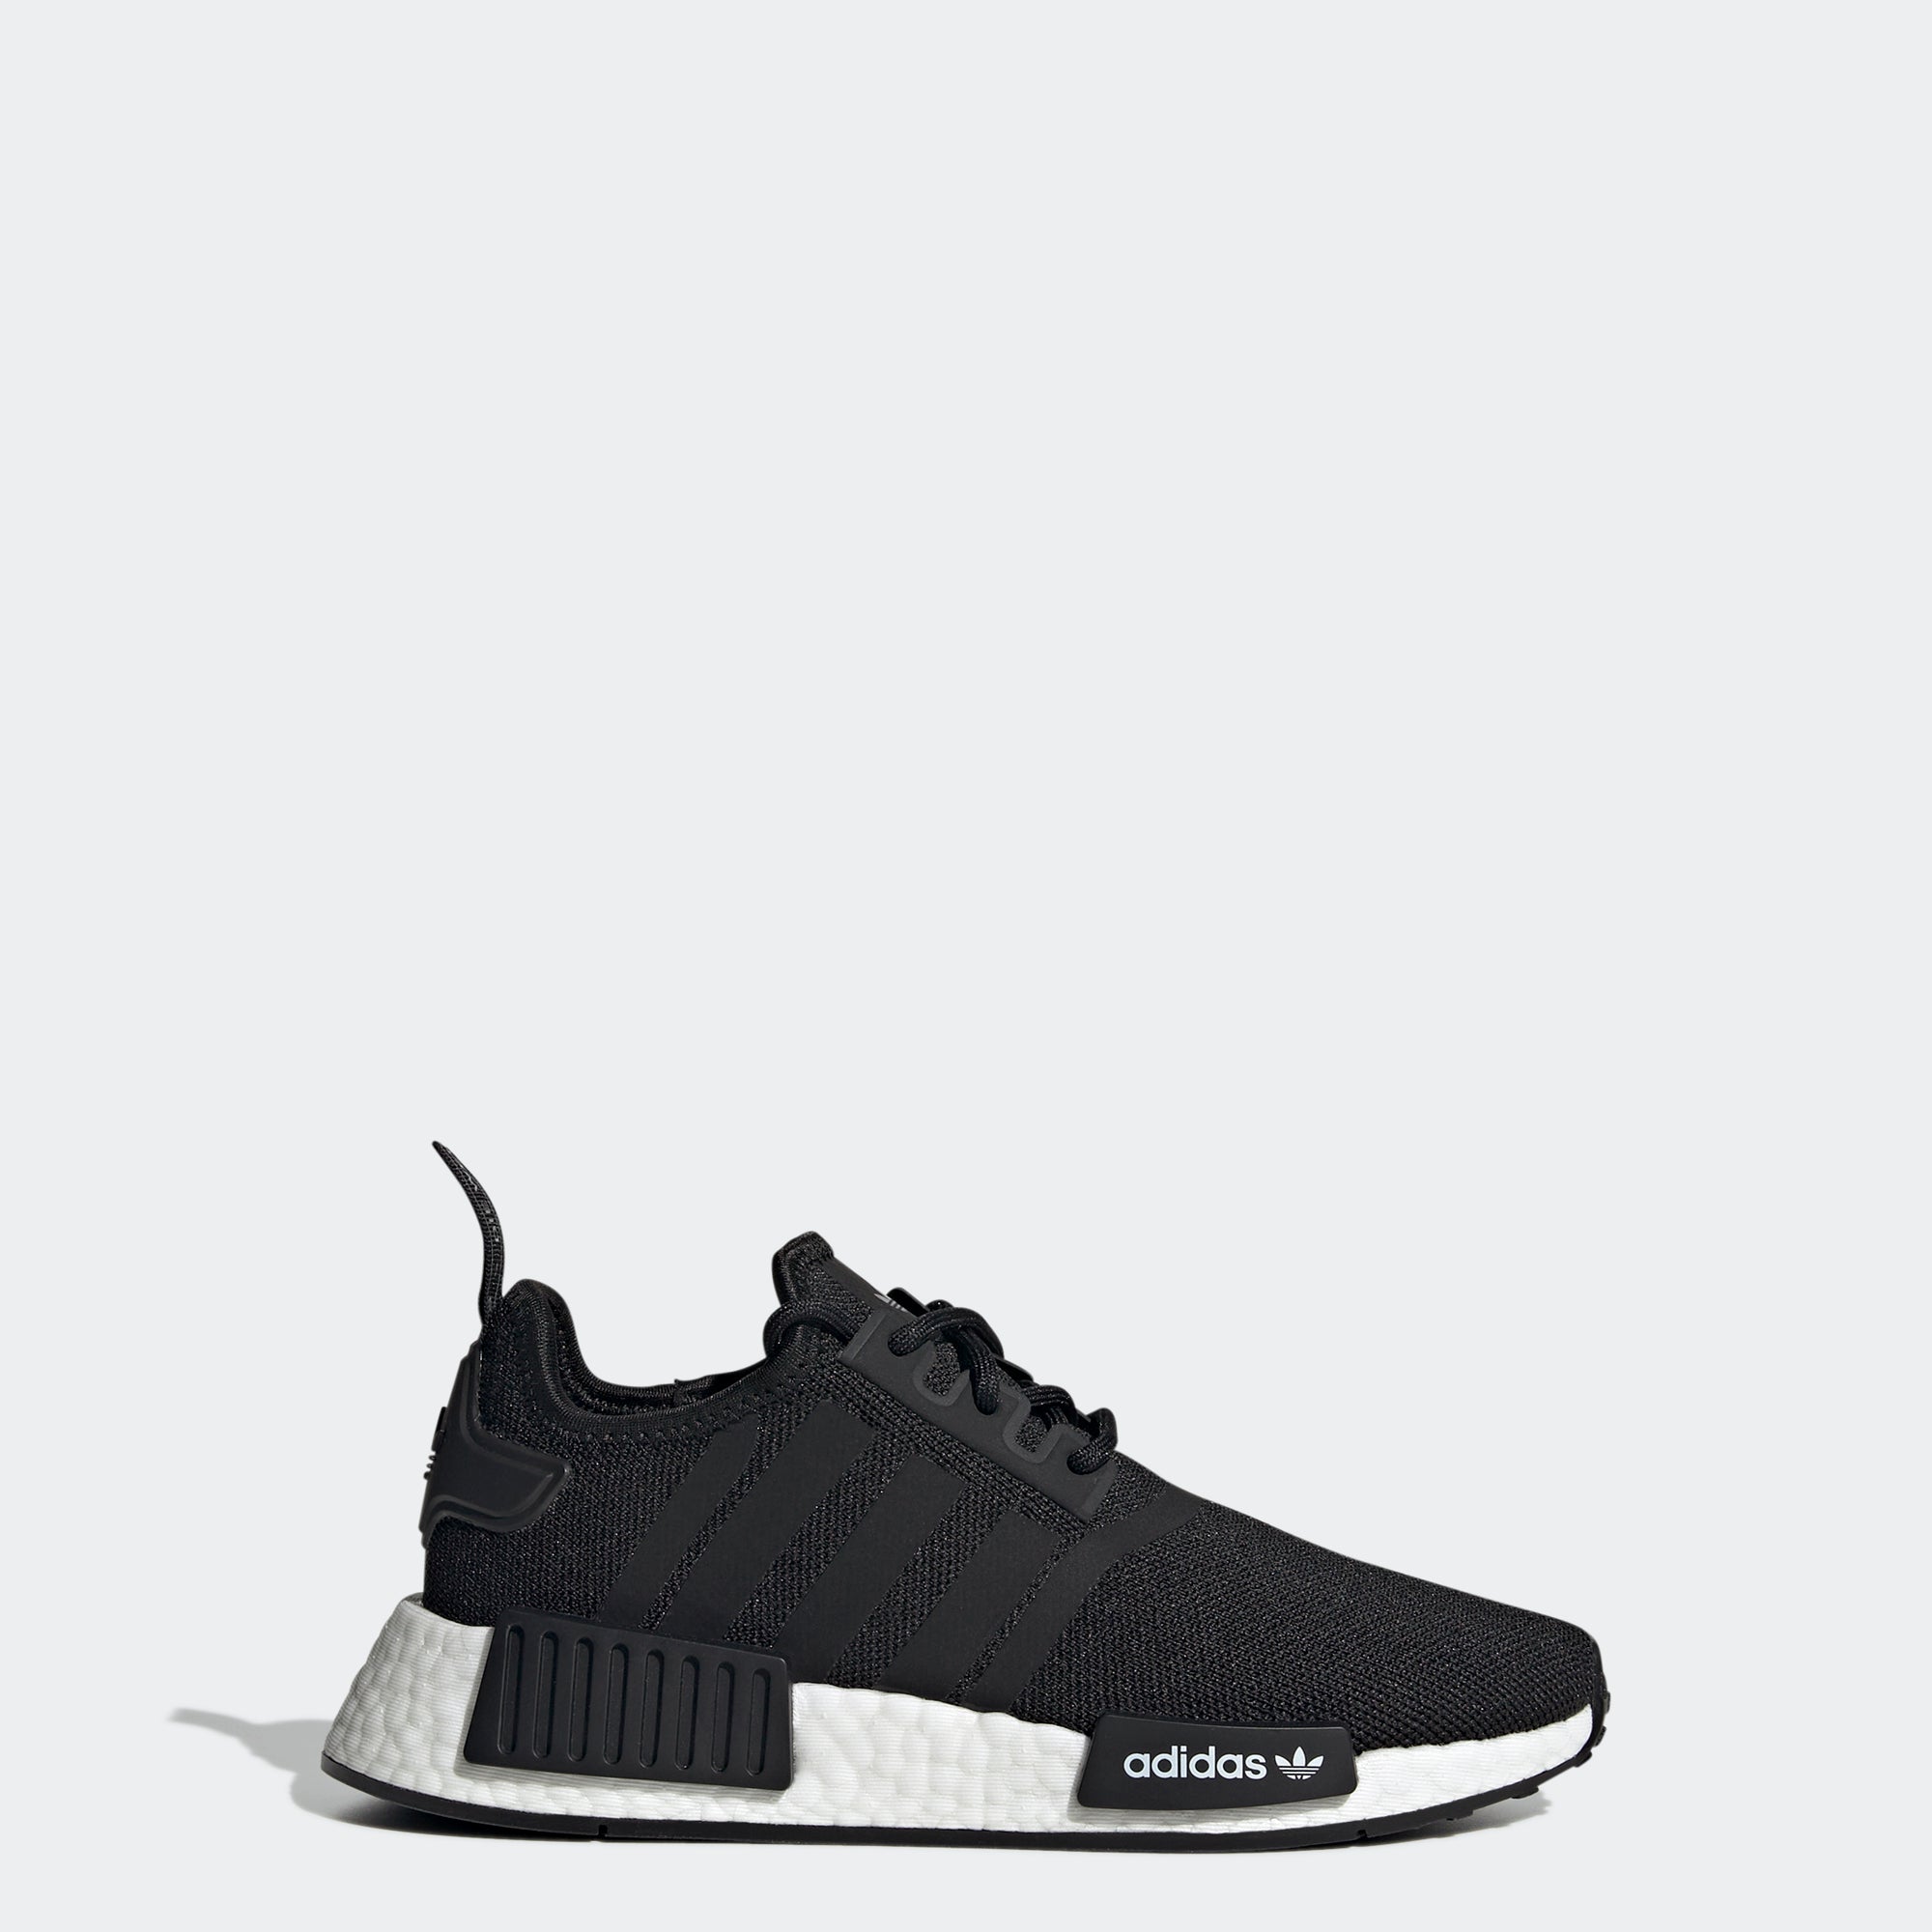 adidas NMD_R1 Refined Shoes Black H02333 | City